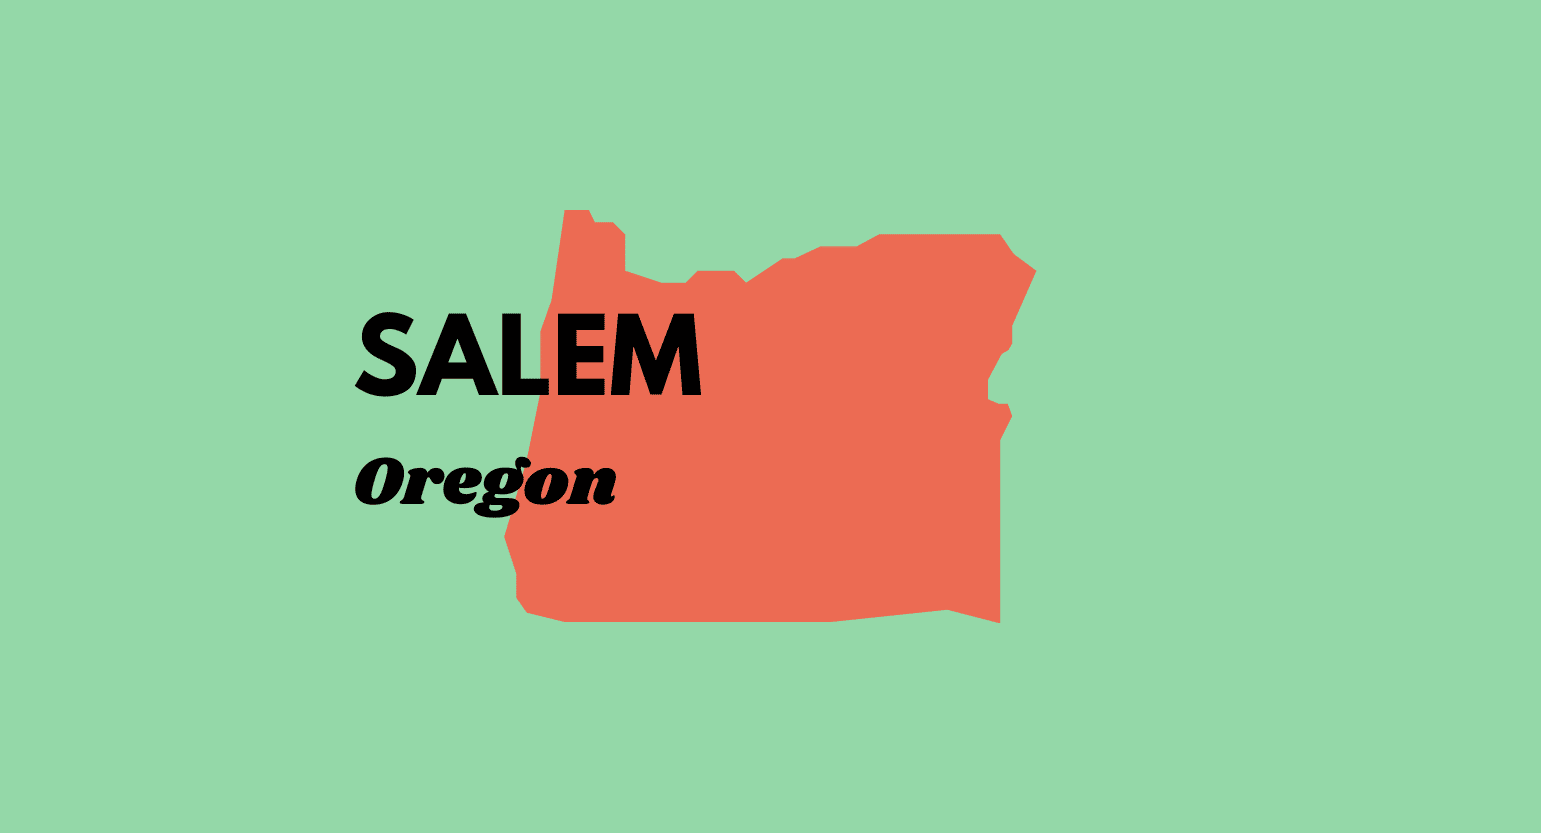 Kratom Laws in Salem, OR 2022 — What’s Changed?